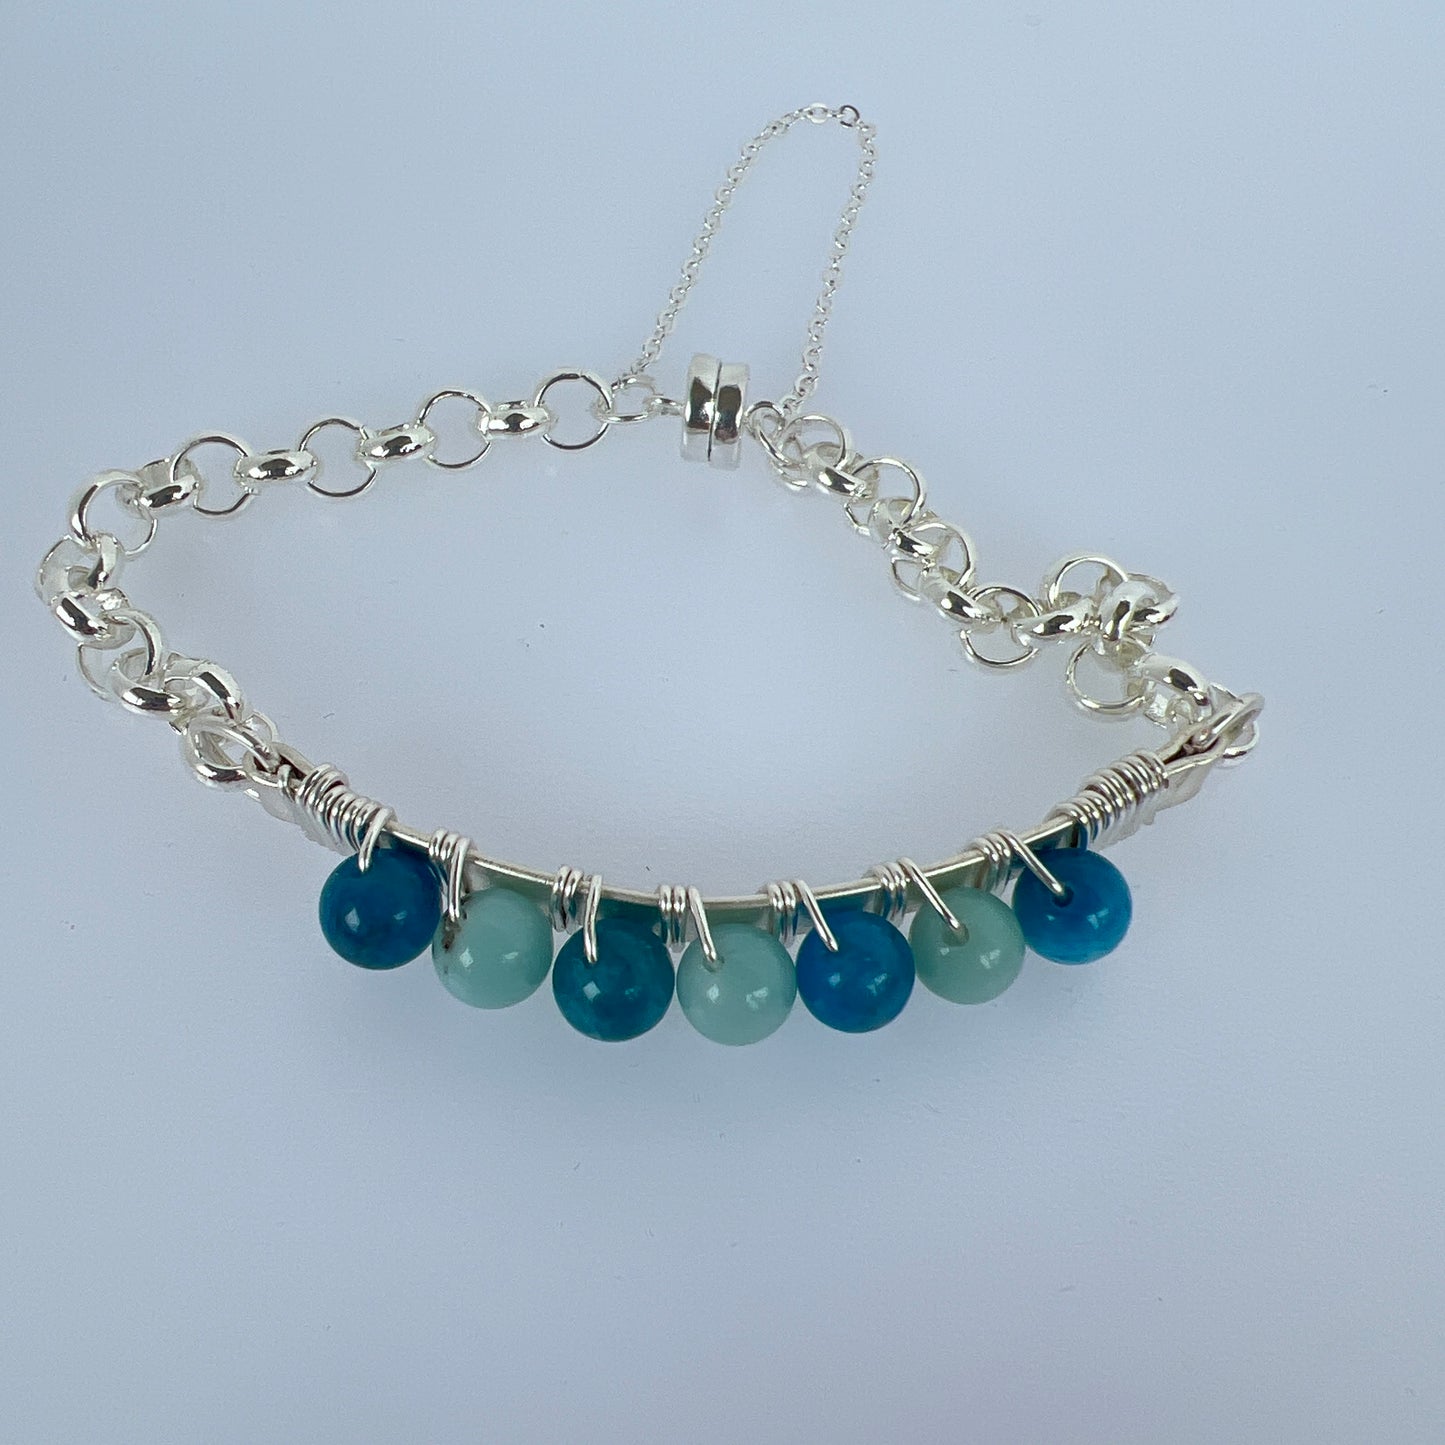 6mm Amazonite/Apetite beads wire wrapped on silver plated with silver plate magnet bracelet